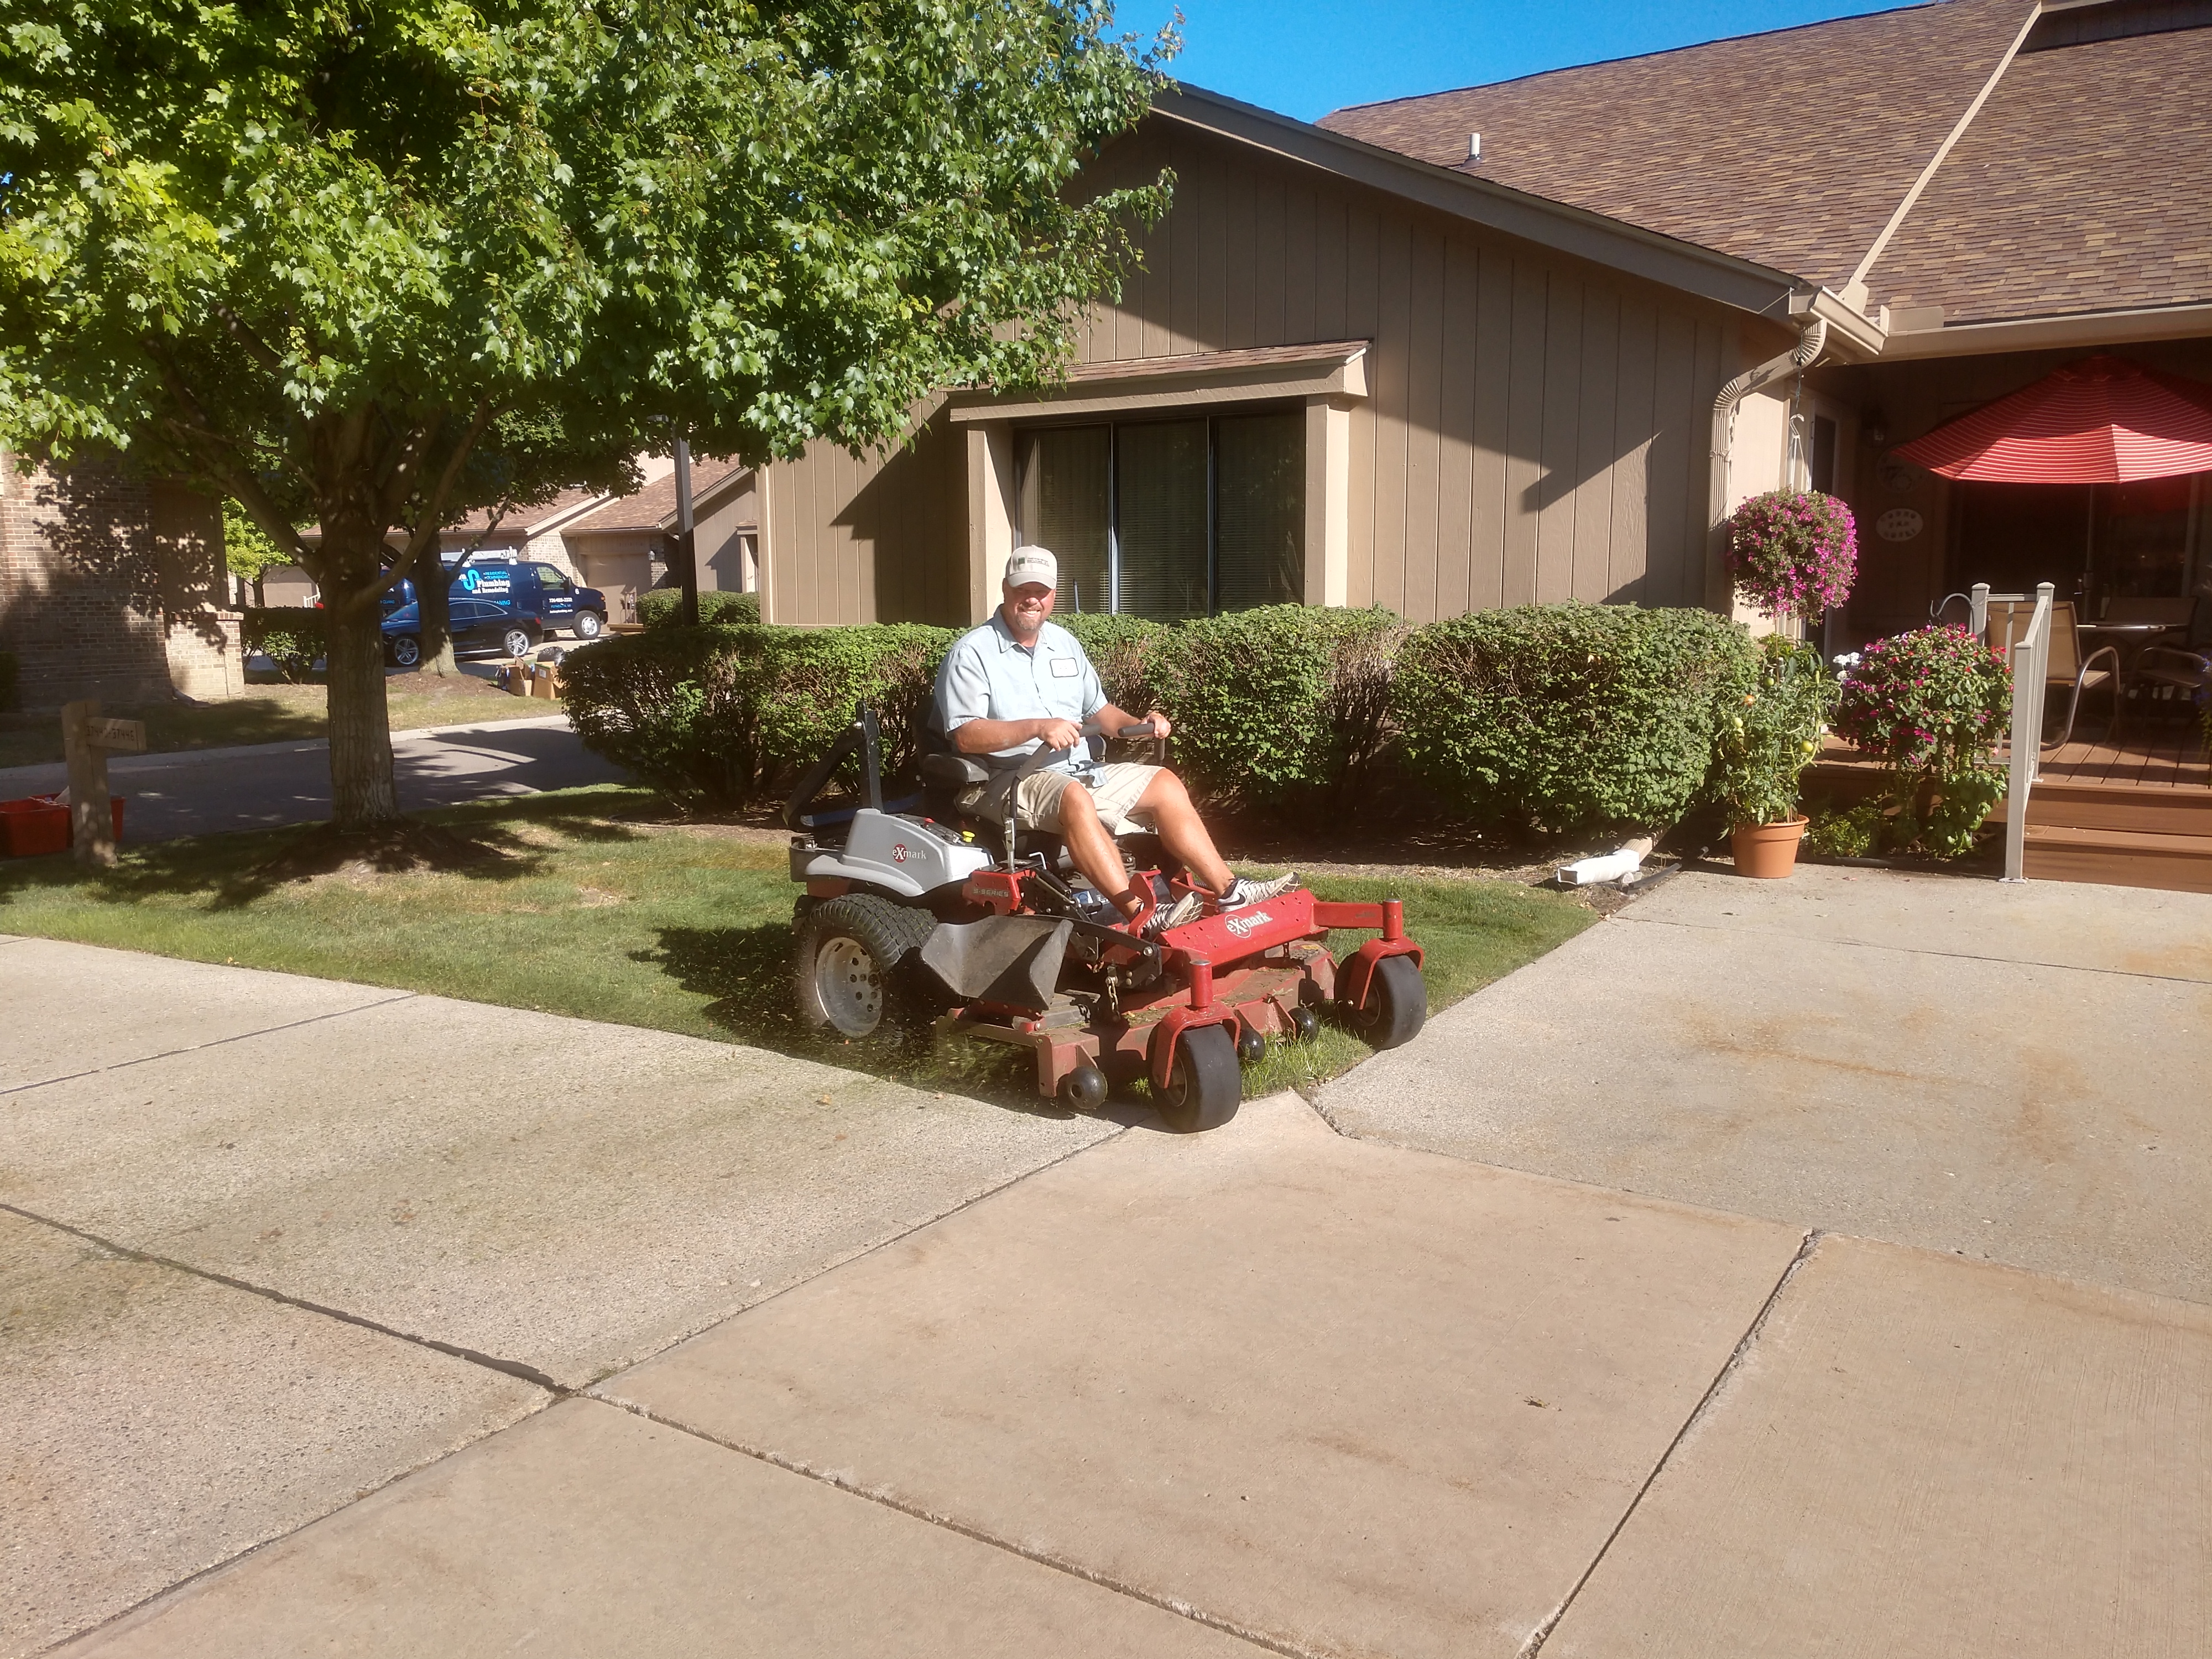 Lawn crew leader on a mower